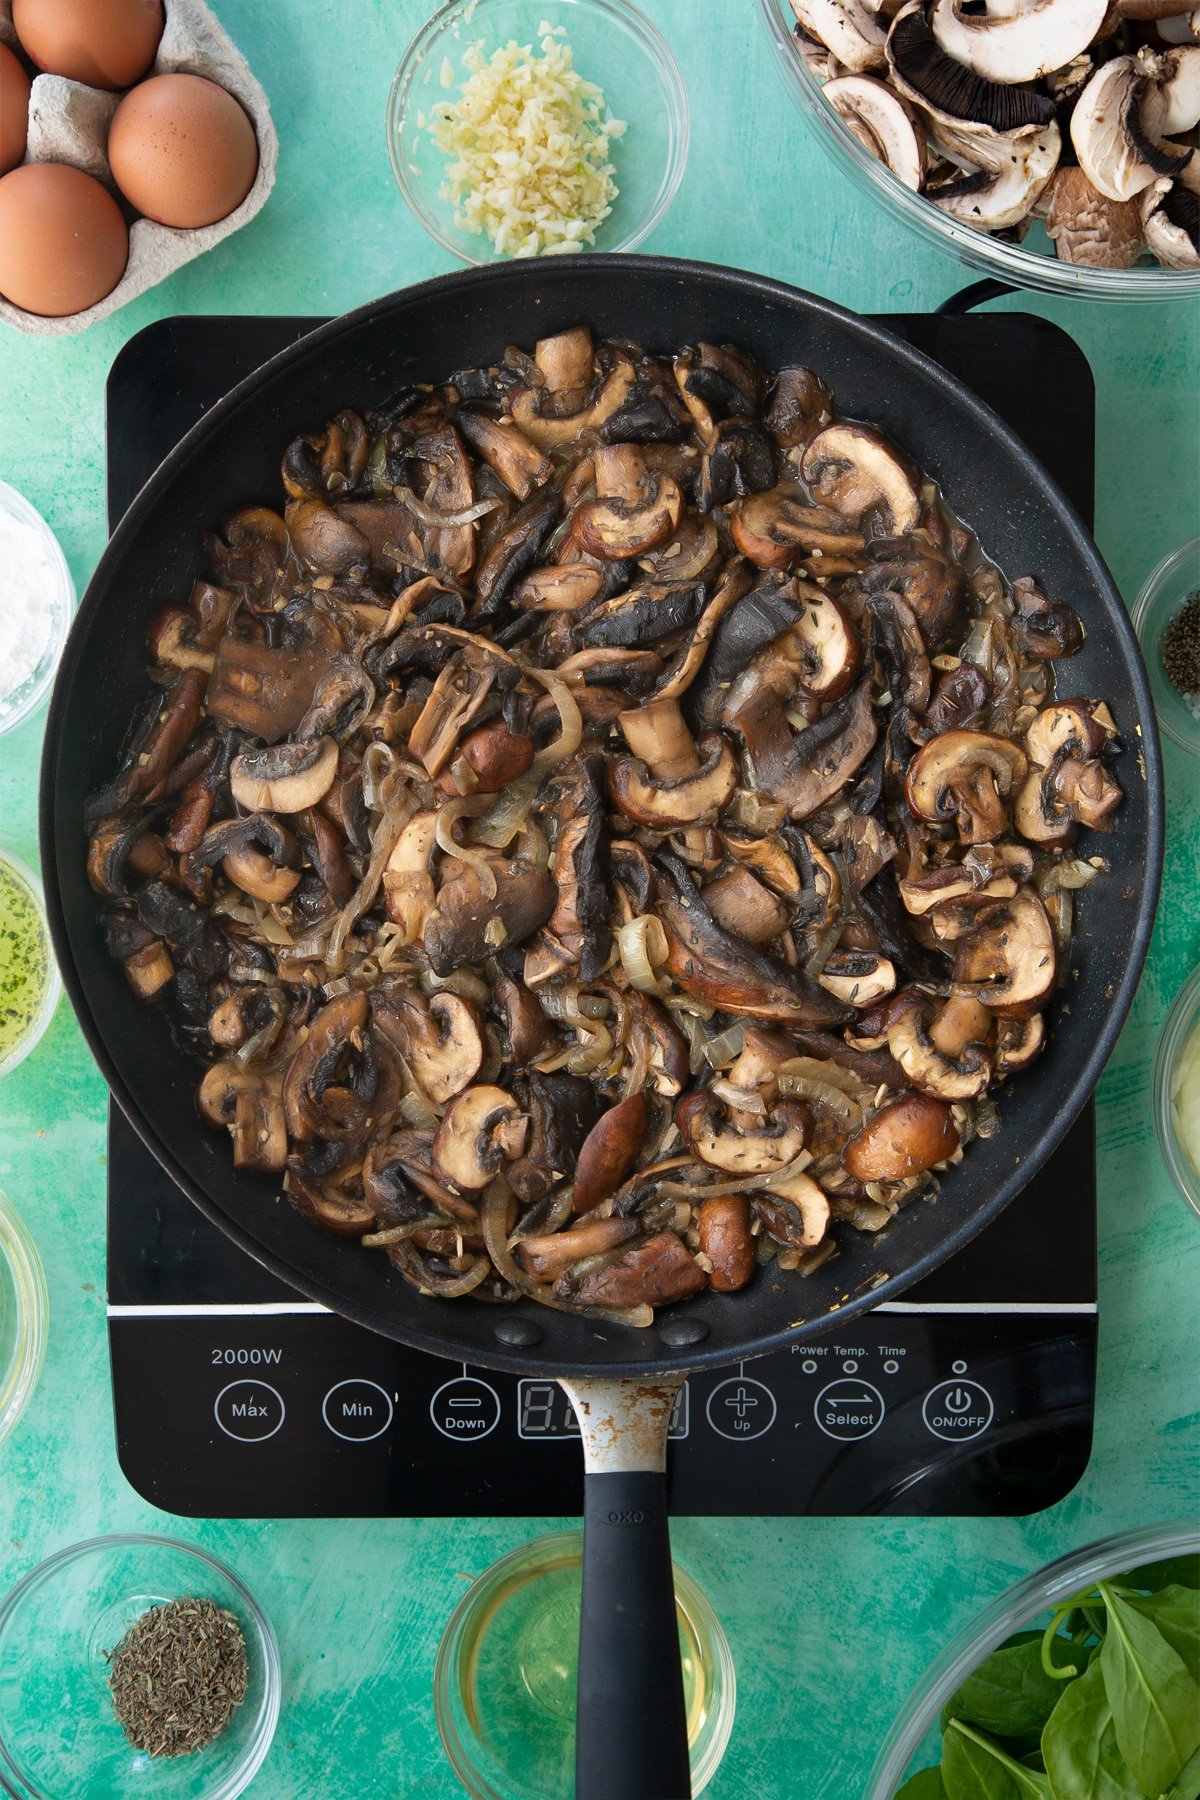 a large frying pan with cooked onions, herbs and garlic in a white wine sauce topped with sliced mushrooms.